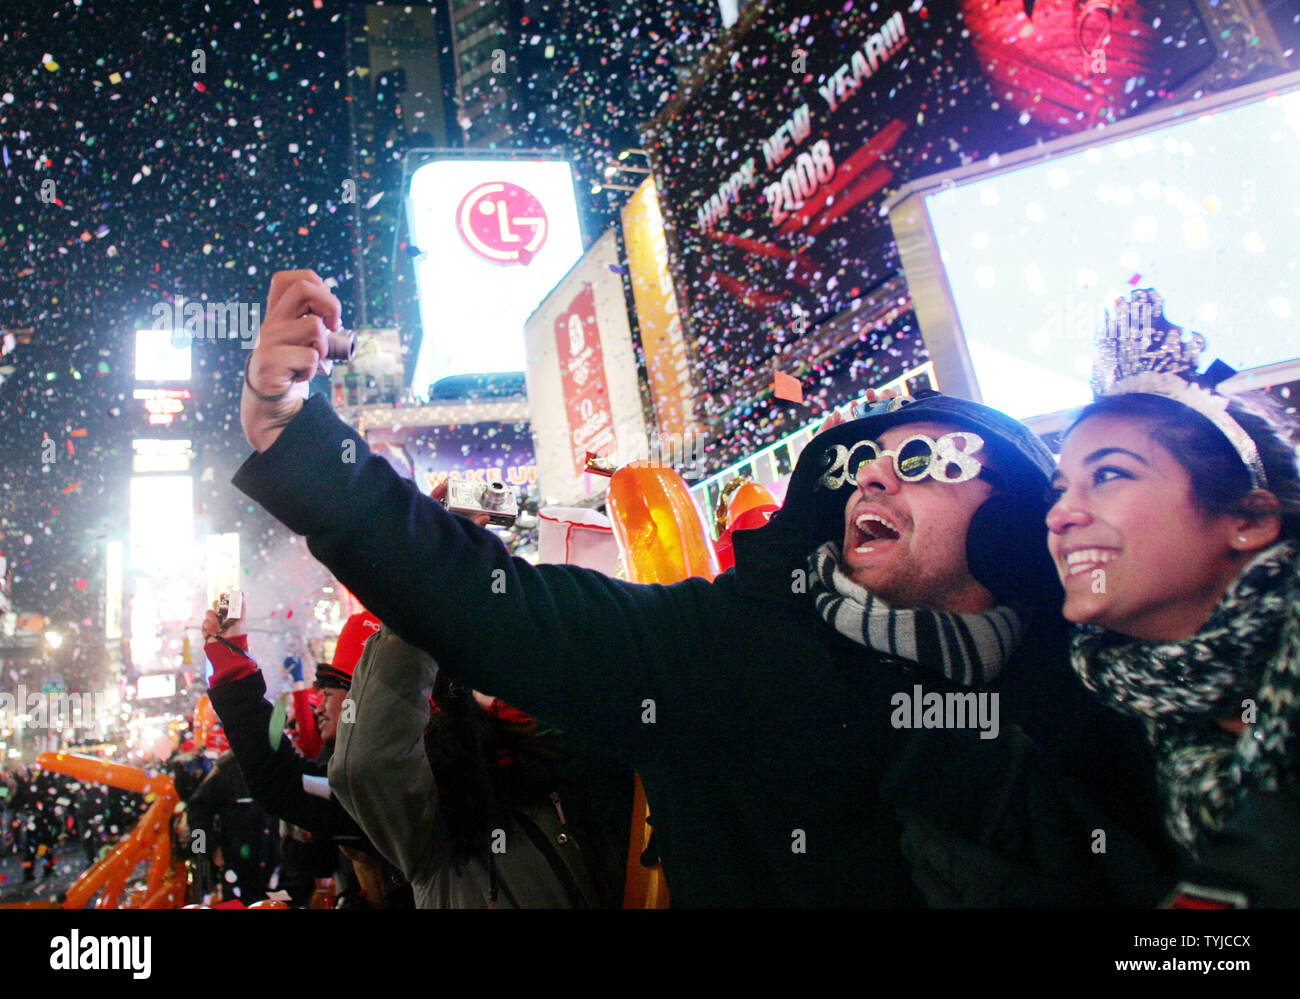 A man takes a photo of himself and his friend as confetti rains down at the stoke of midnight on the hundreds of thousands of revelers gathered in Times Square to celebrate New Years Eve on January 1, 2008 in New York. (UPI Photo/Monika Graff). Stock Photo